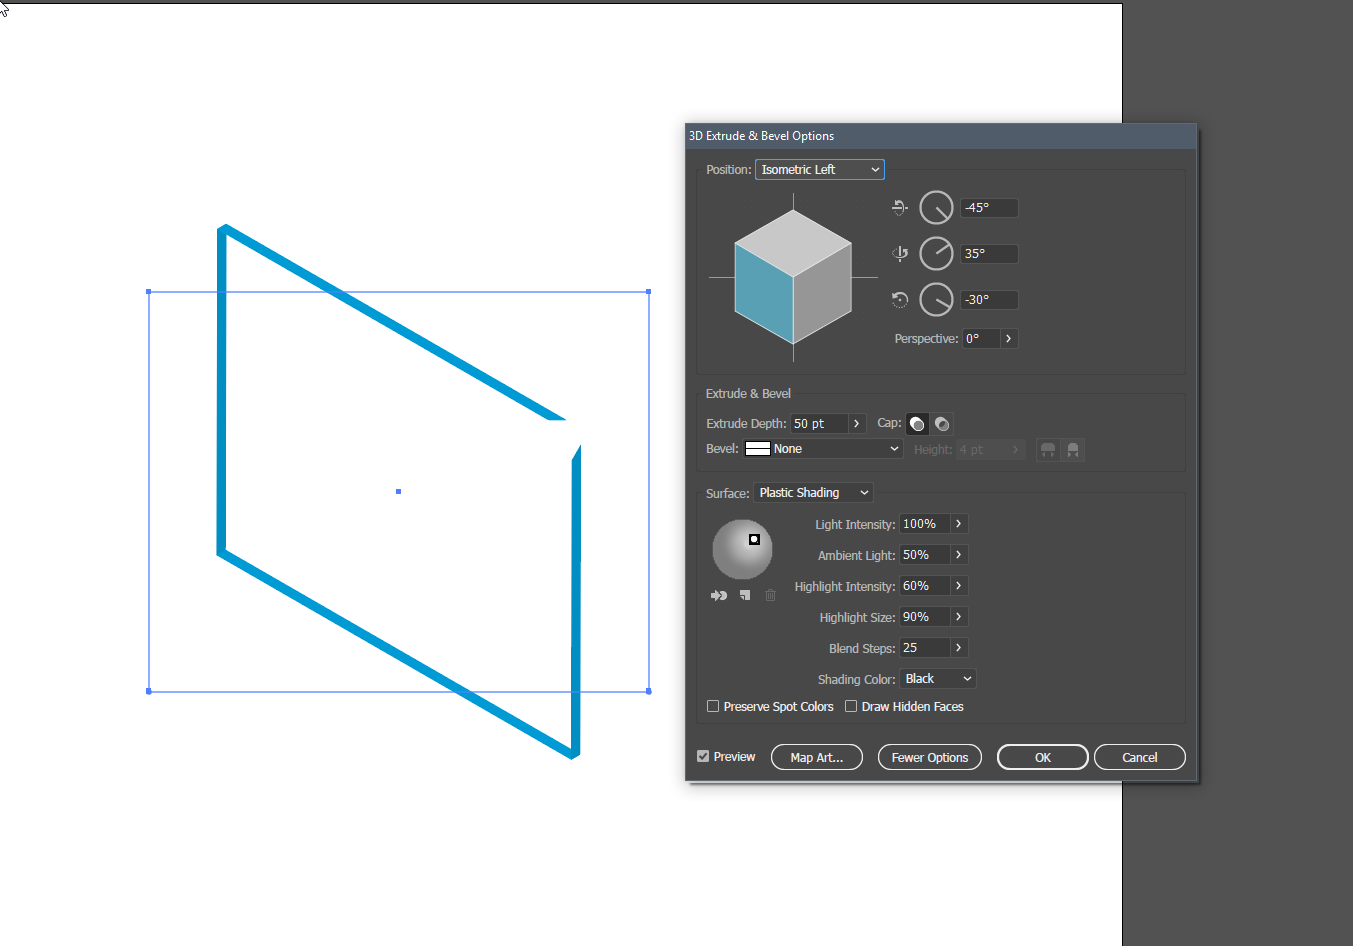 Solved: Extrude & Bevel Issue - Grainy Appearance - Adobe